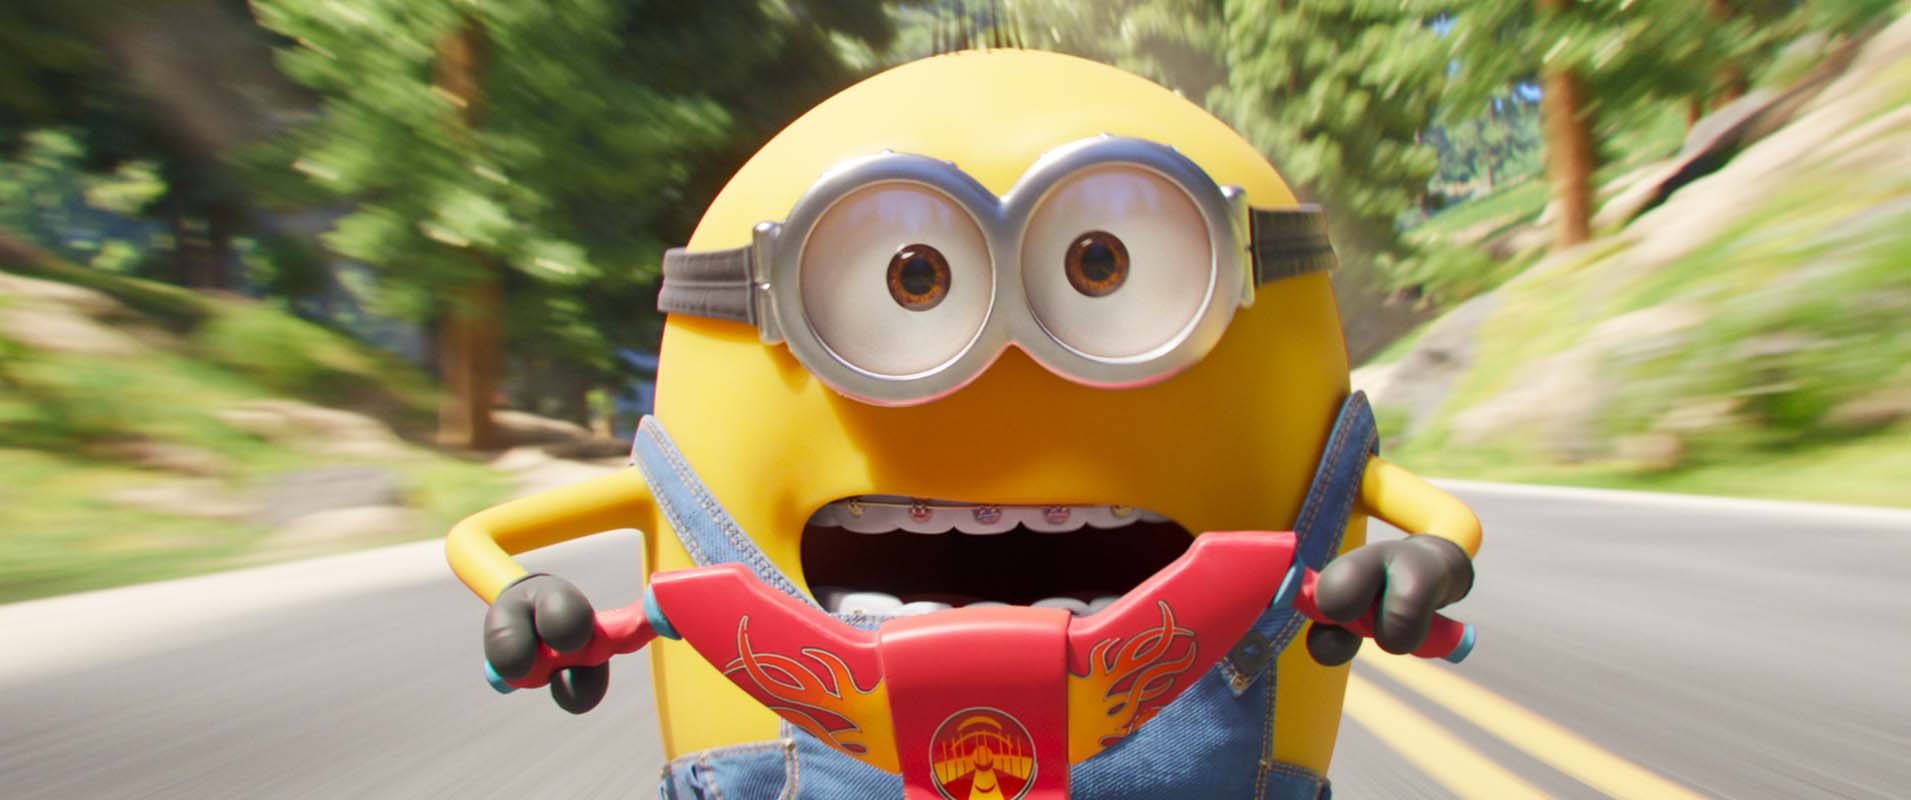 Minions The Rise Of Gru Riding